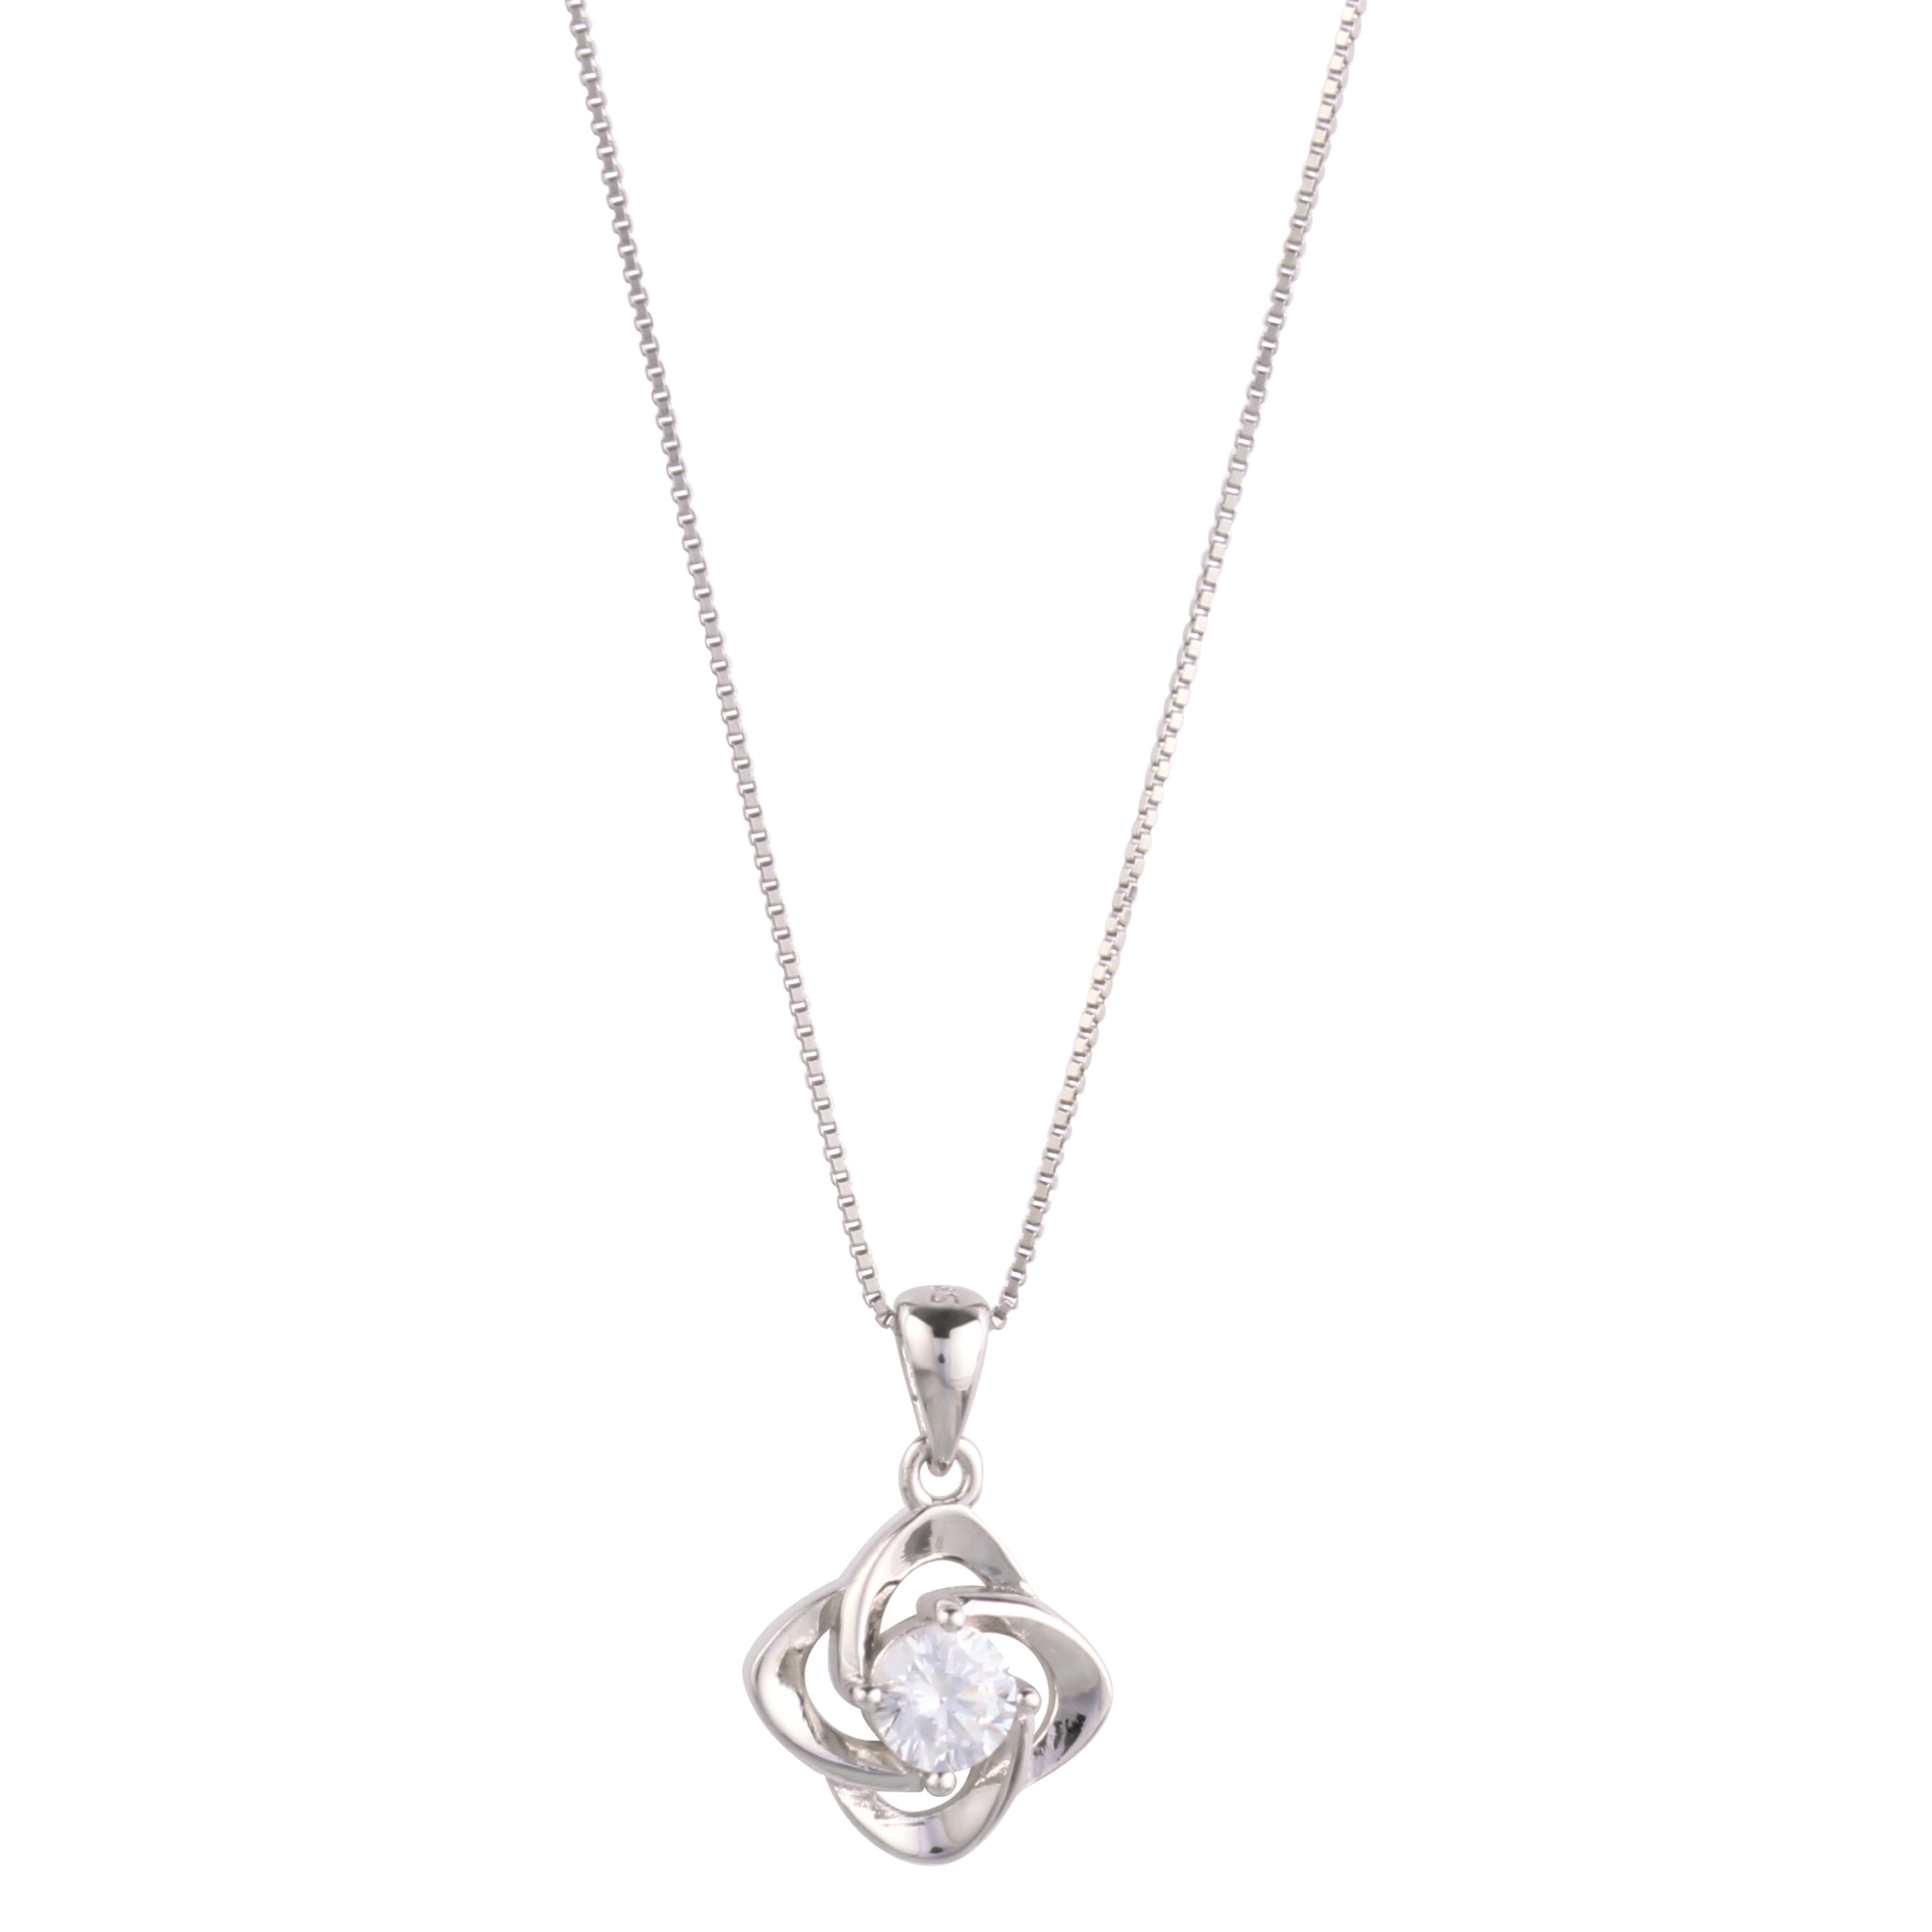 925 Sterling Silver Love Knot Pendant Necklace Nichestar